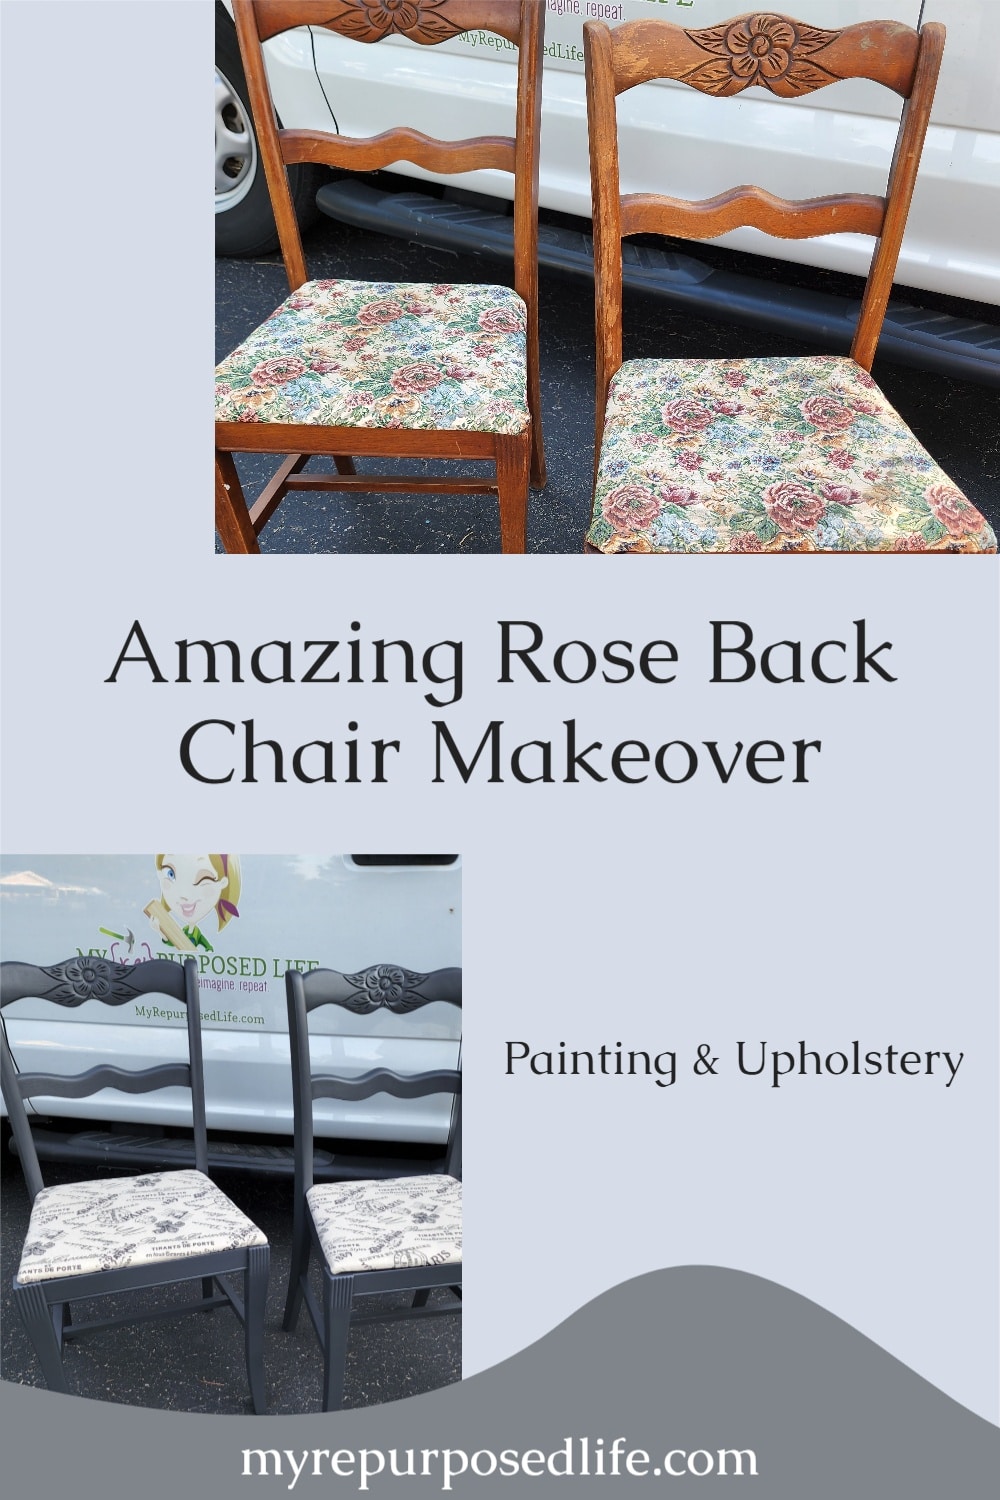 A step by step guide to show you how the do a rose back chair makeover. Yep, I'll show you tips for painting and reupholstering the seat. A tutorial that will help you makeover any dining chair you have. #myrepurposedlife #upcycle #roseback #diningchair #painting #reupholstery #diy #thriftstore via @repurposedlife